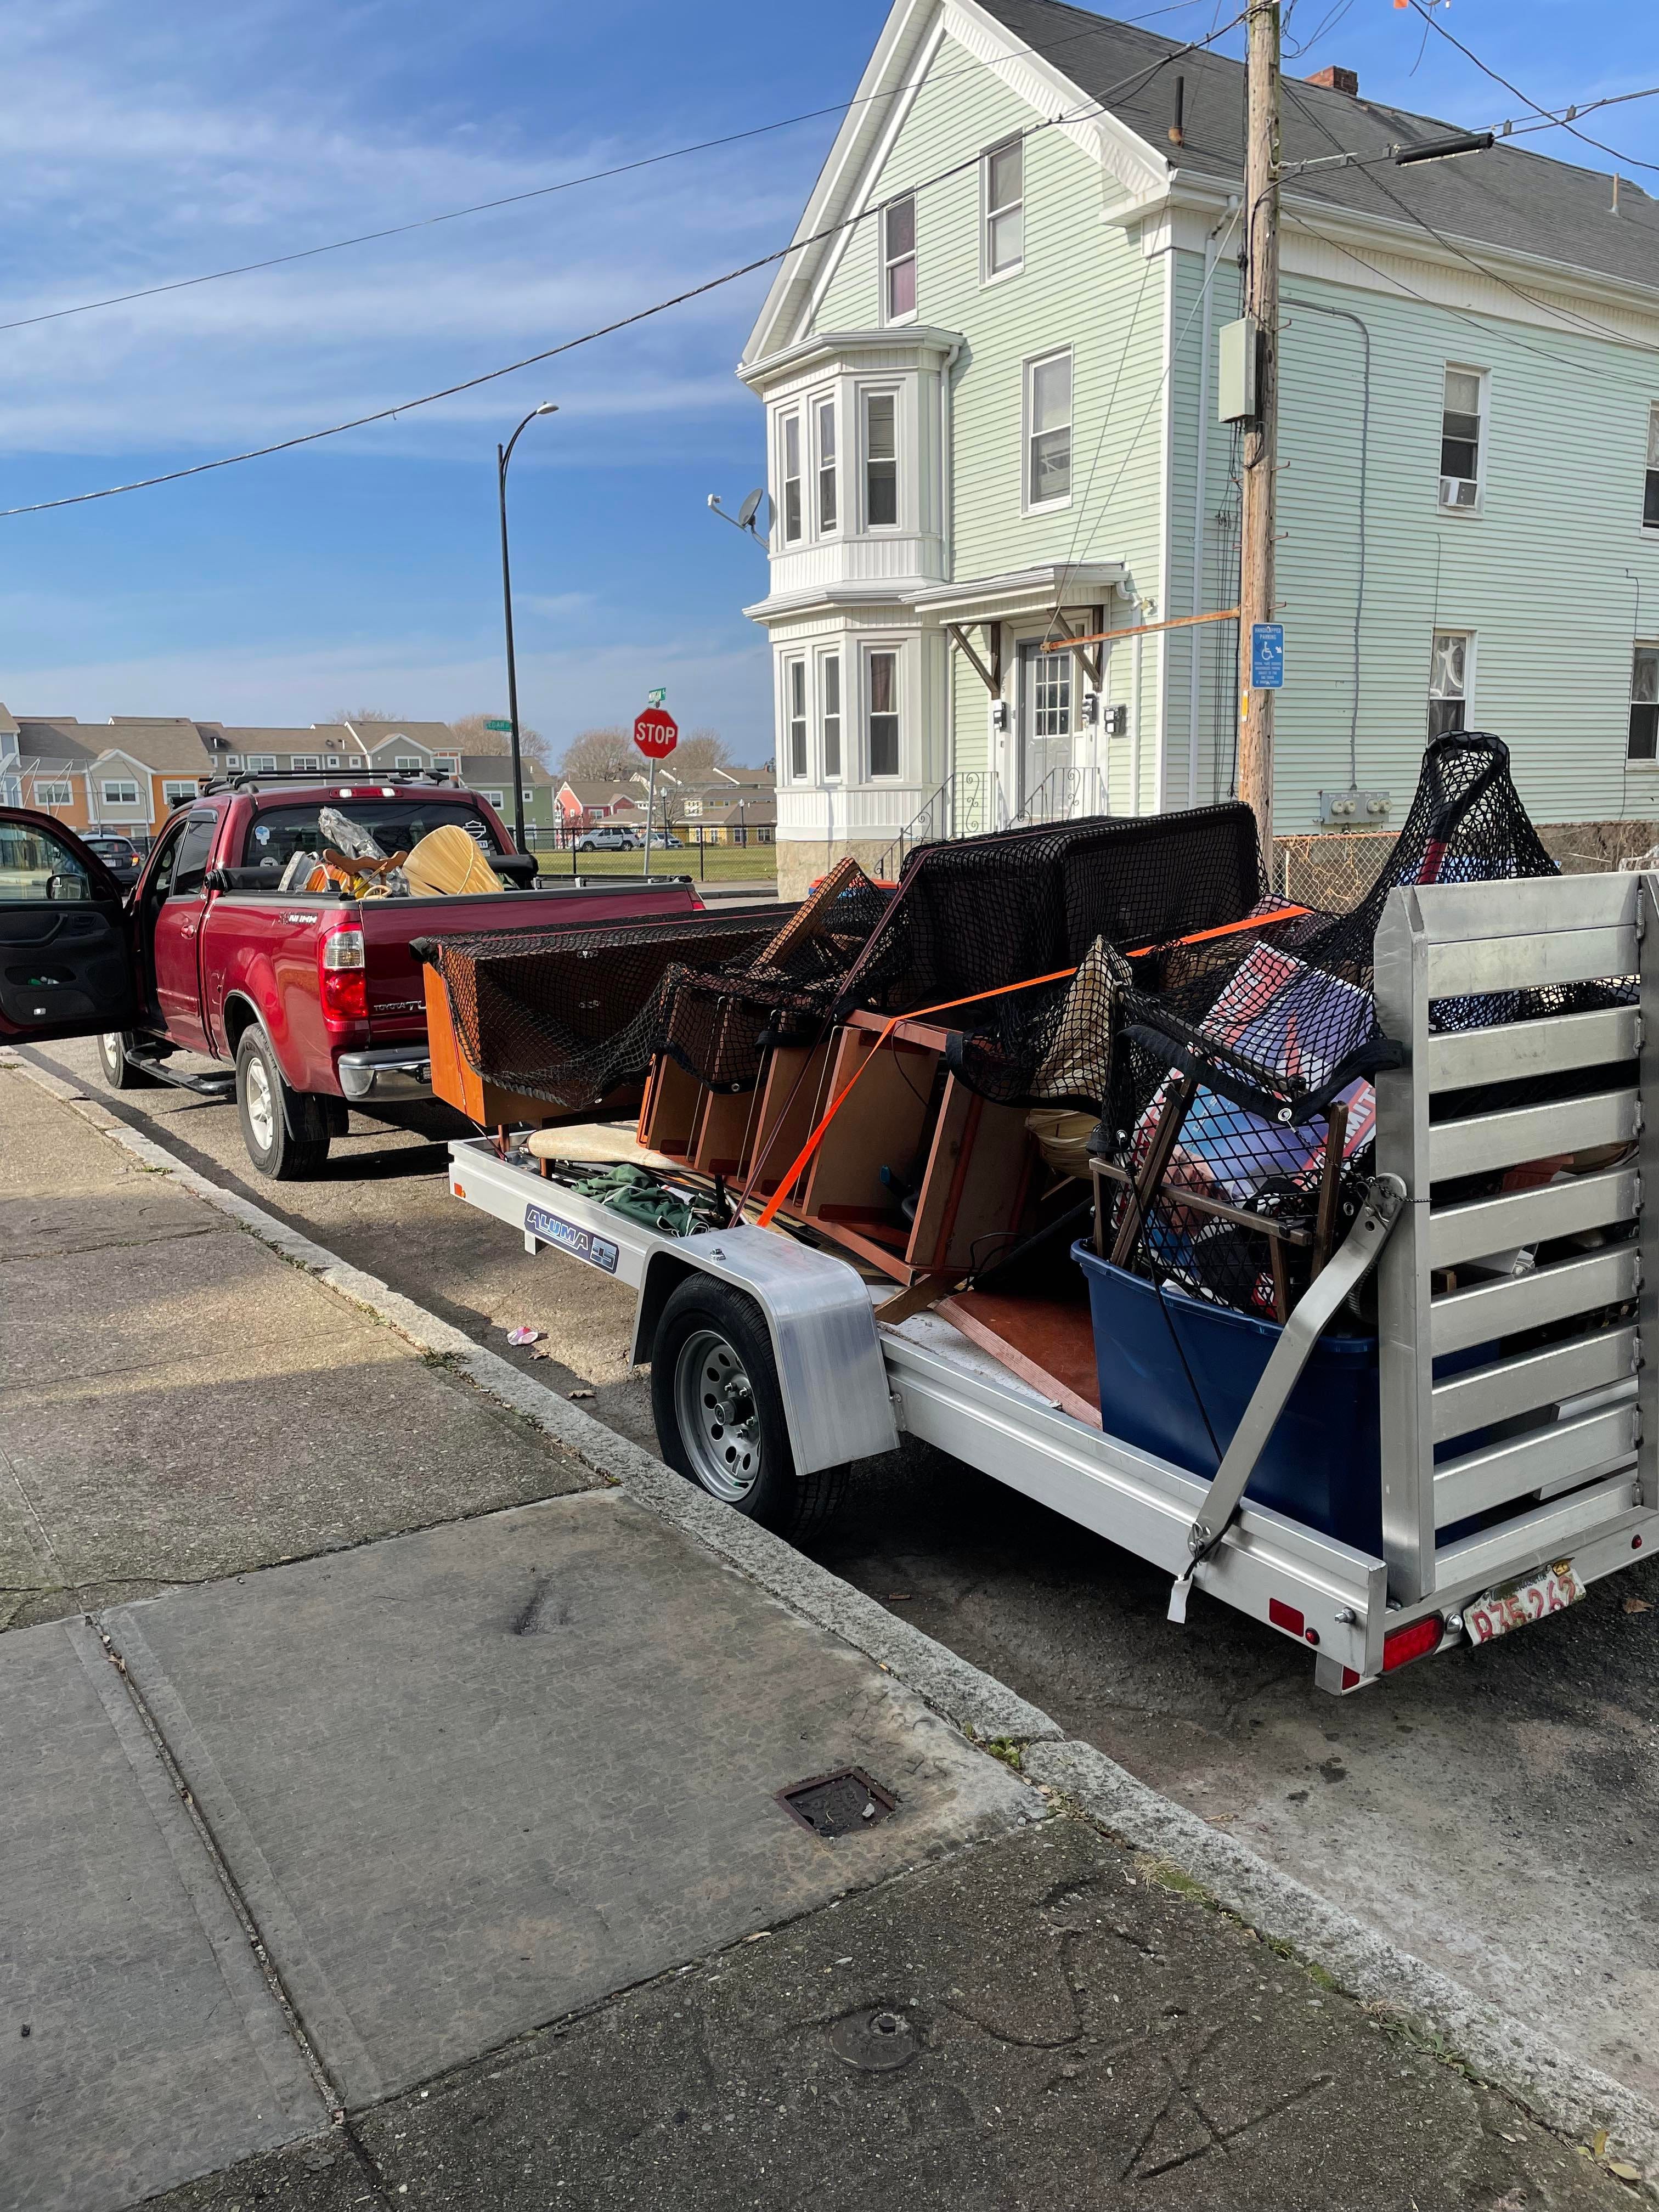 Fairhaven Junk Removal: new business removes clutter, donates to needy